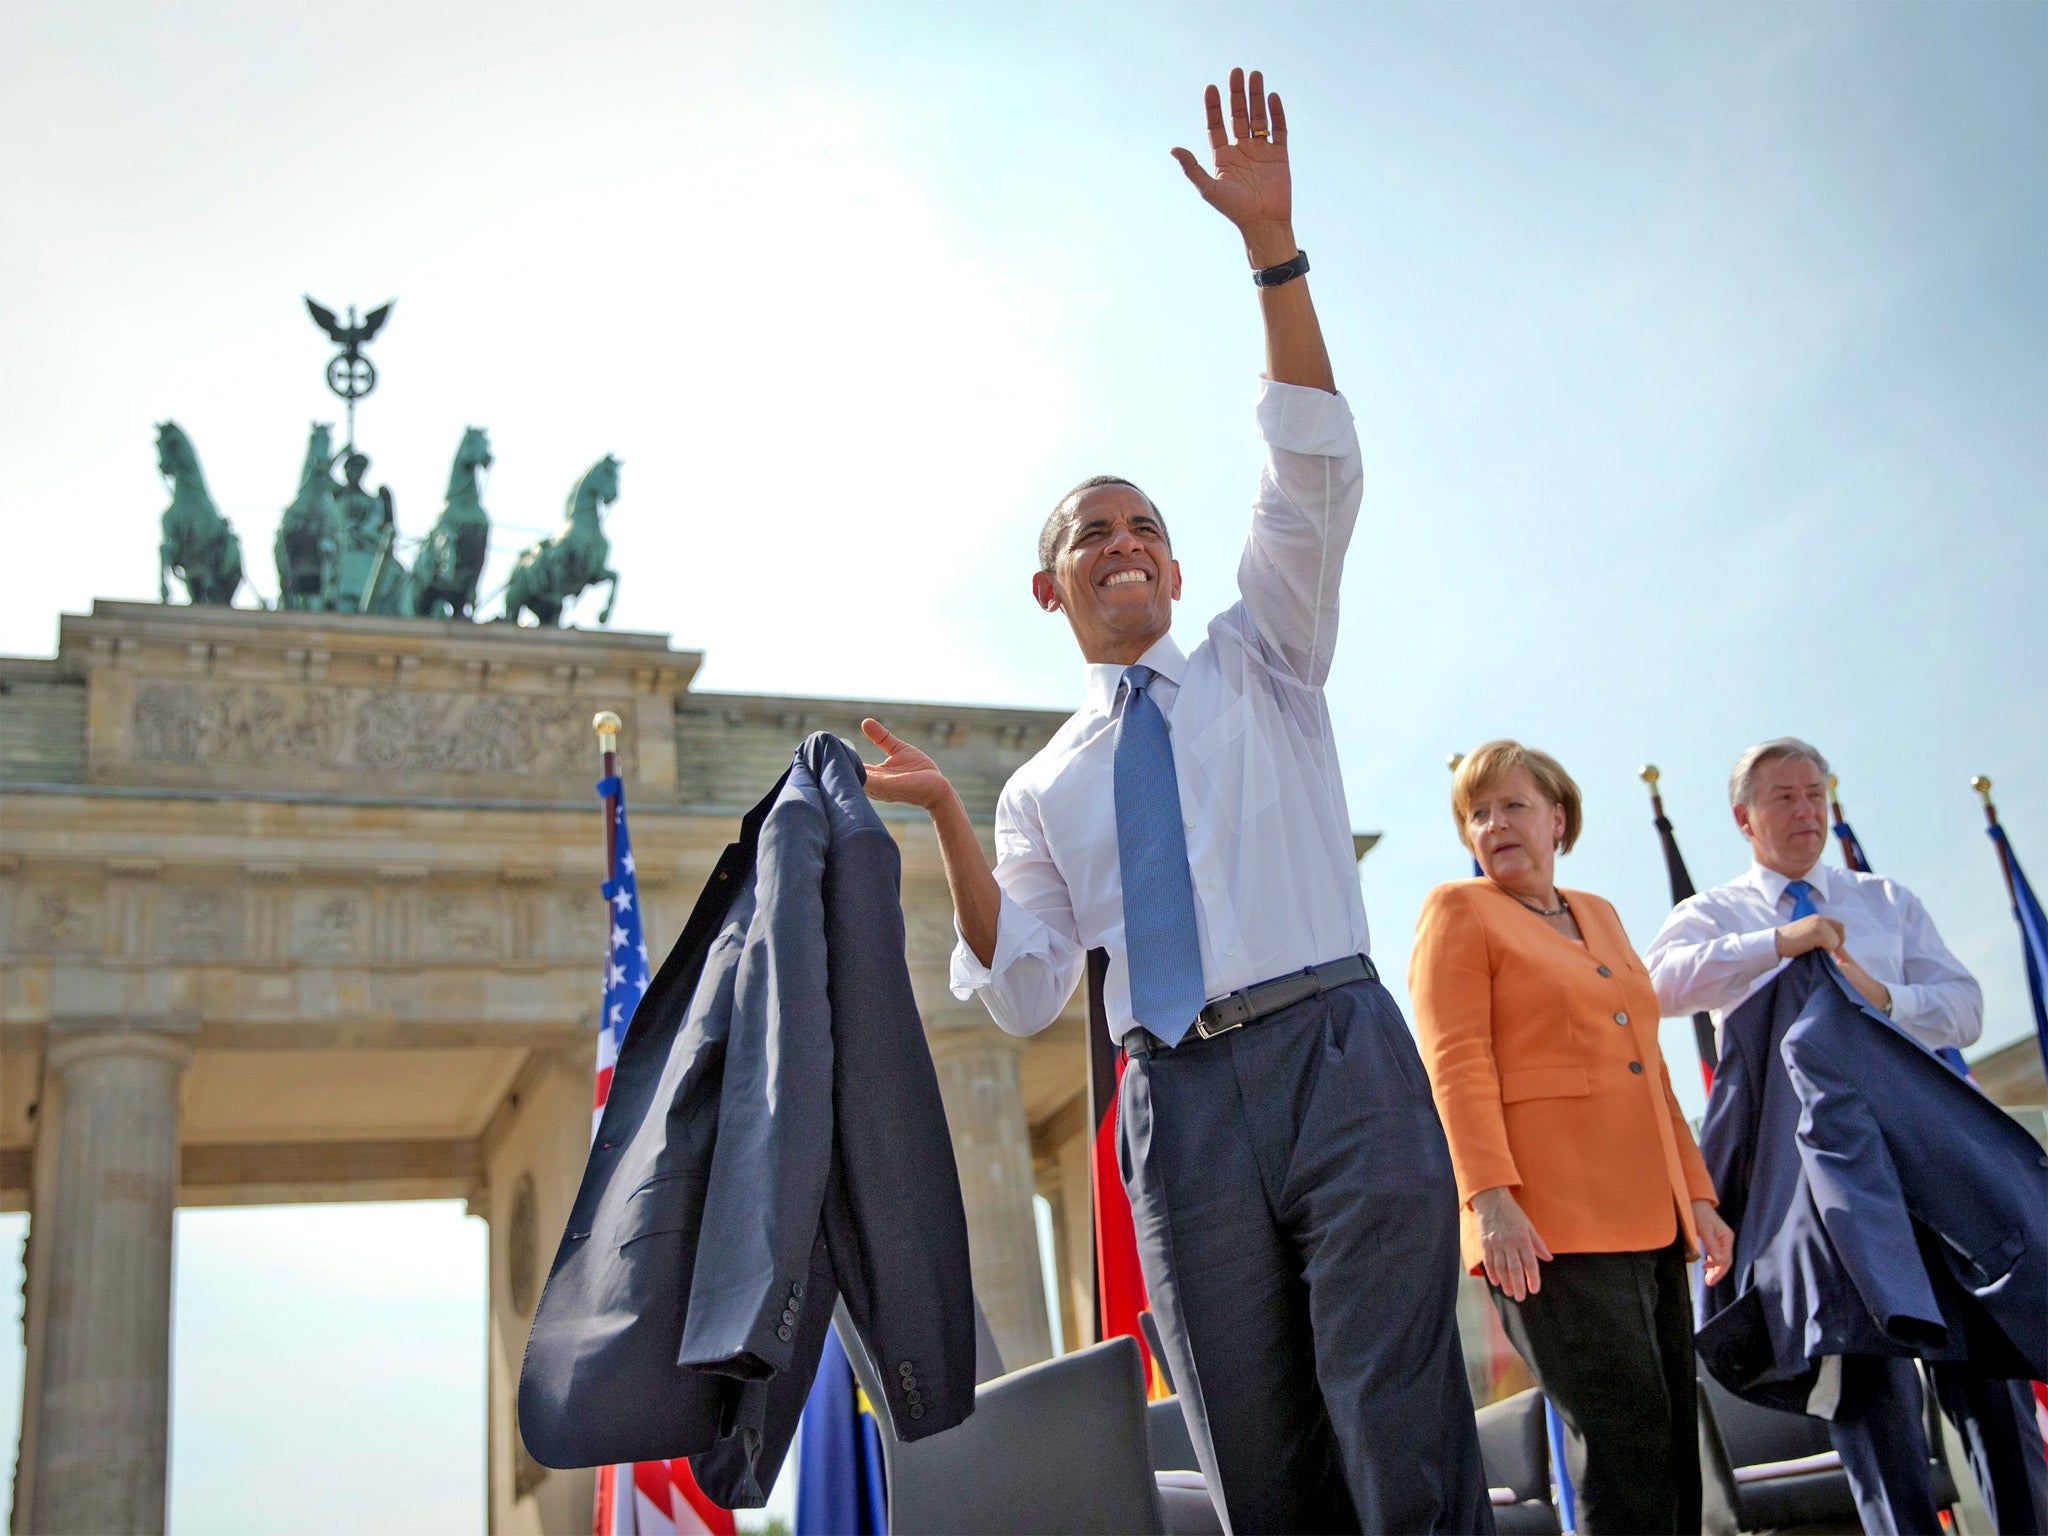 Barack Obama waves to crowds at the Brandenburg Gate yesterday, watched by Chancellor Angela Merkel and the Mayor of Berlin, Klaus Wowereit